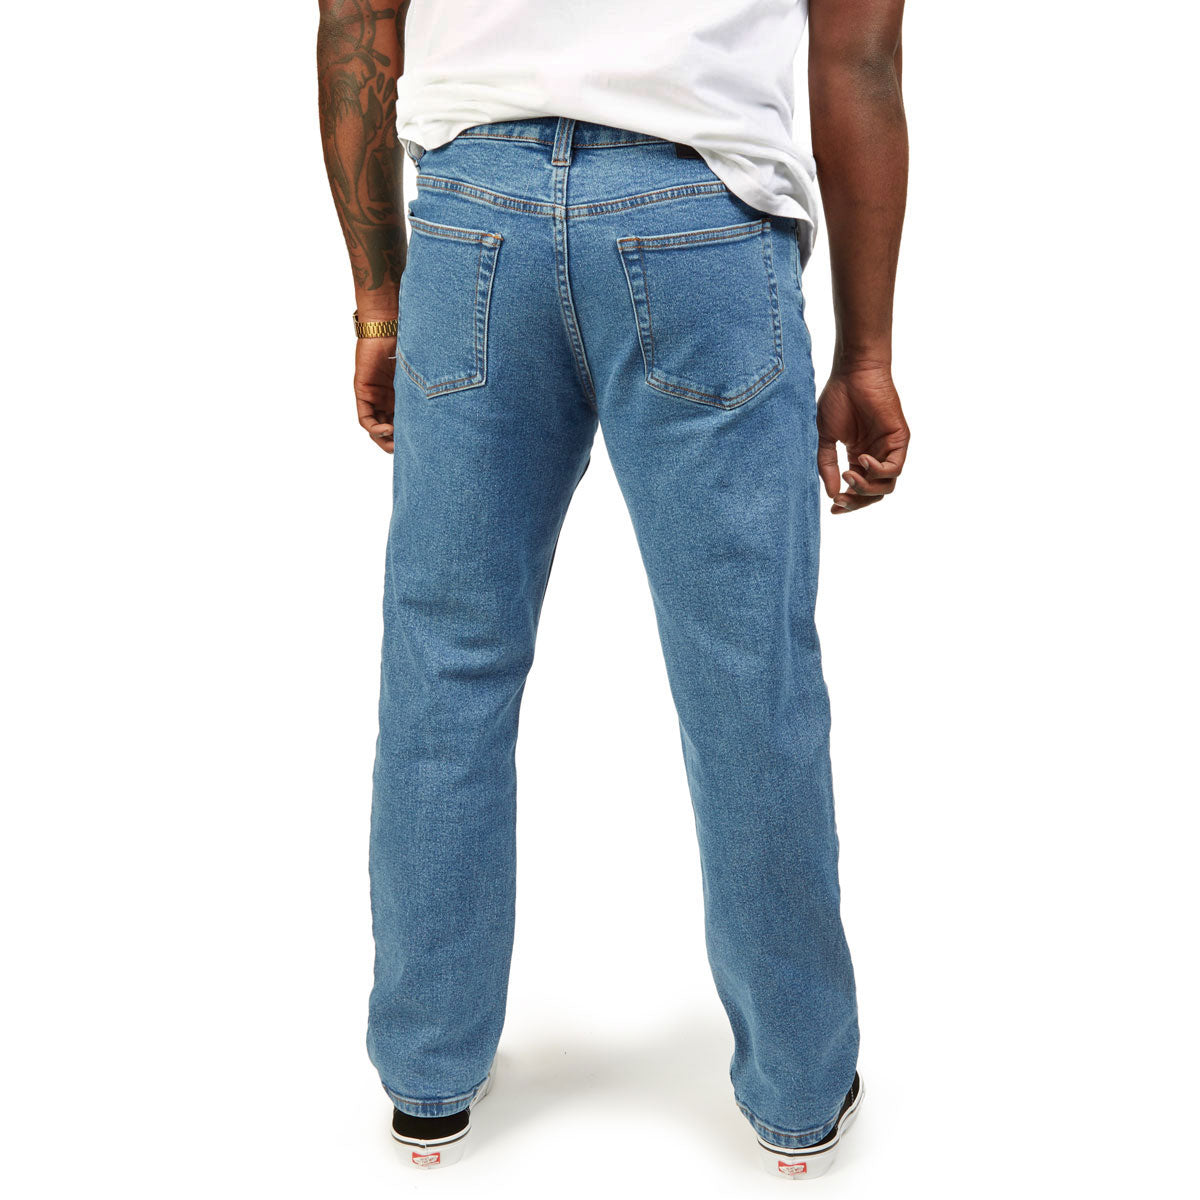 CCS 12oz Stretch Relaxed Denim Jeans - 12oz Rinse image 4